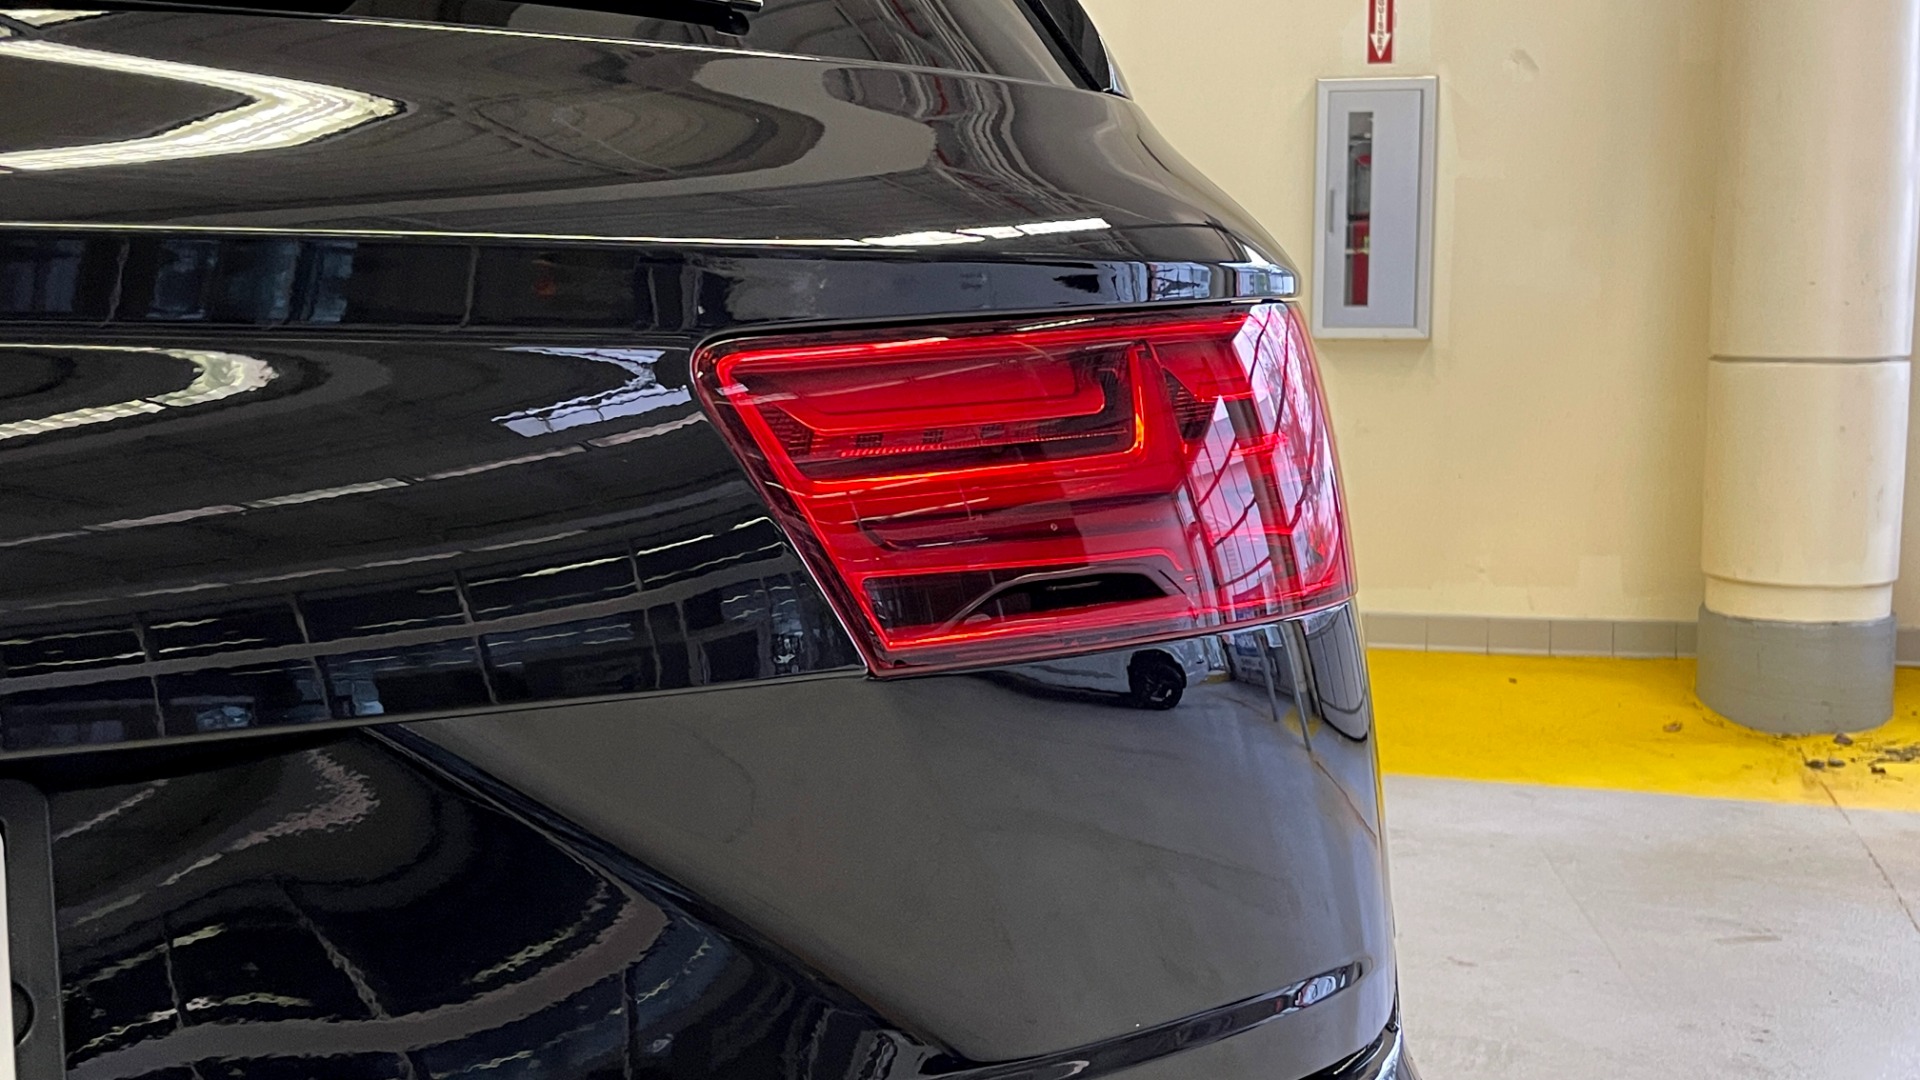 Used 2019 Audi Q7 PREMIUM PLUS / NAV / SUNROOF / DRVR ASST / COLD WTHR / 20IN WHLS / REARVIEW for sale $51,795 at Formula Imports in Charlotte NC 28227 15